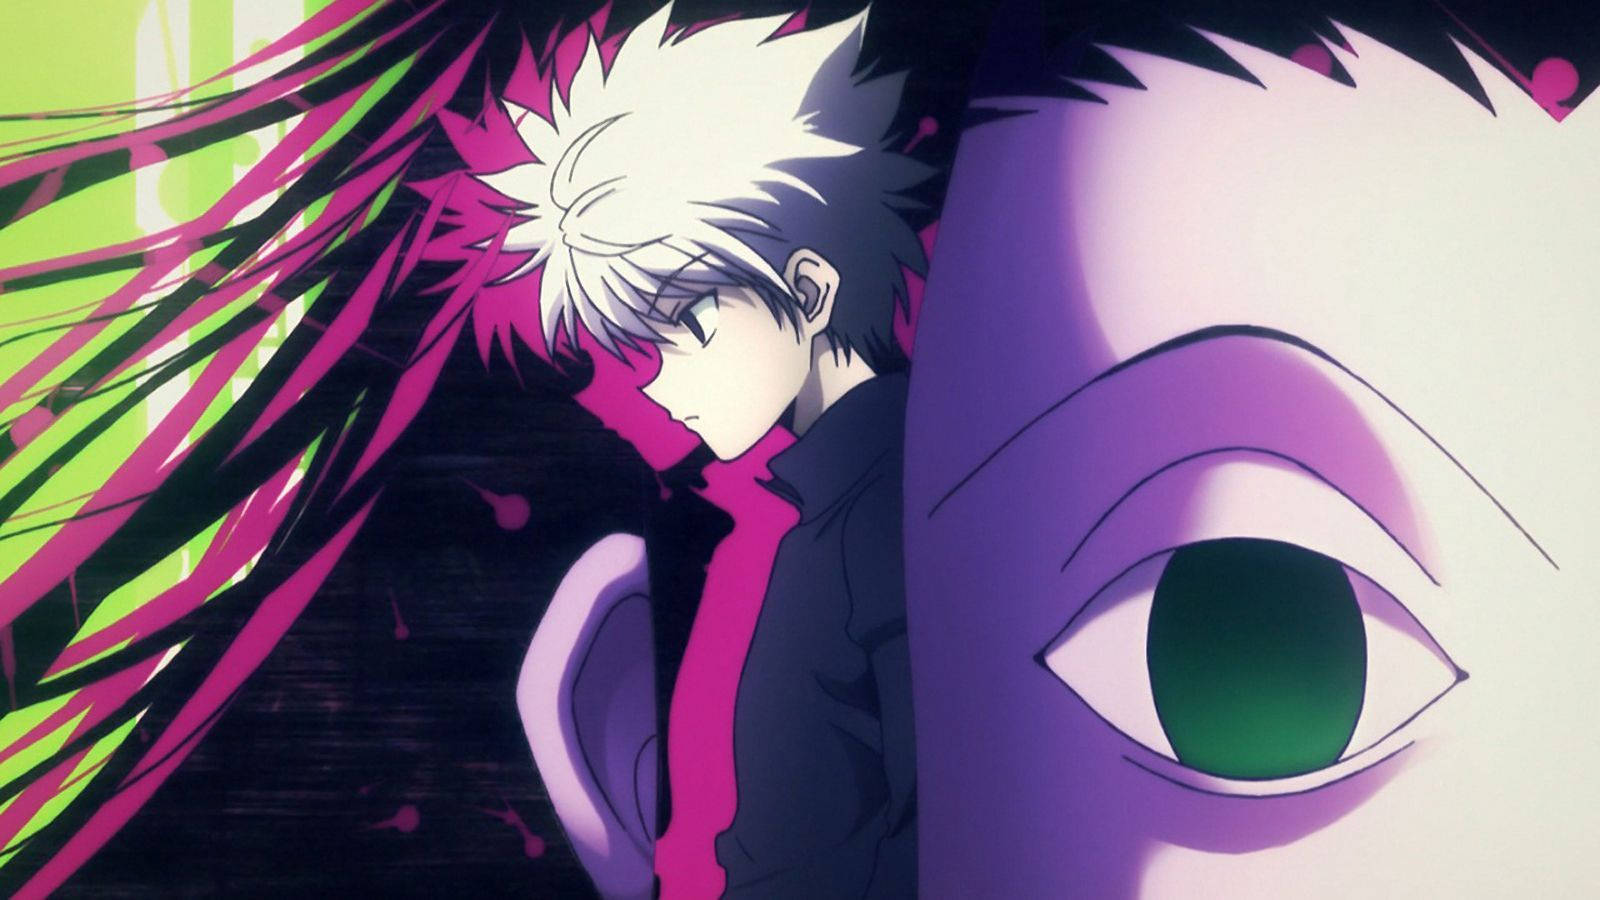 Killua Zoldyck and his brother Illumi embrace as they protect each other in Hunter X Hunter Wallpaper